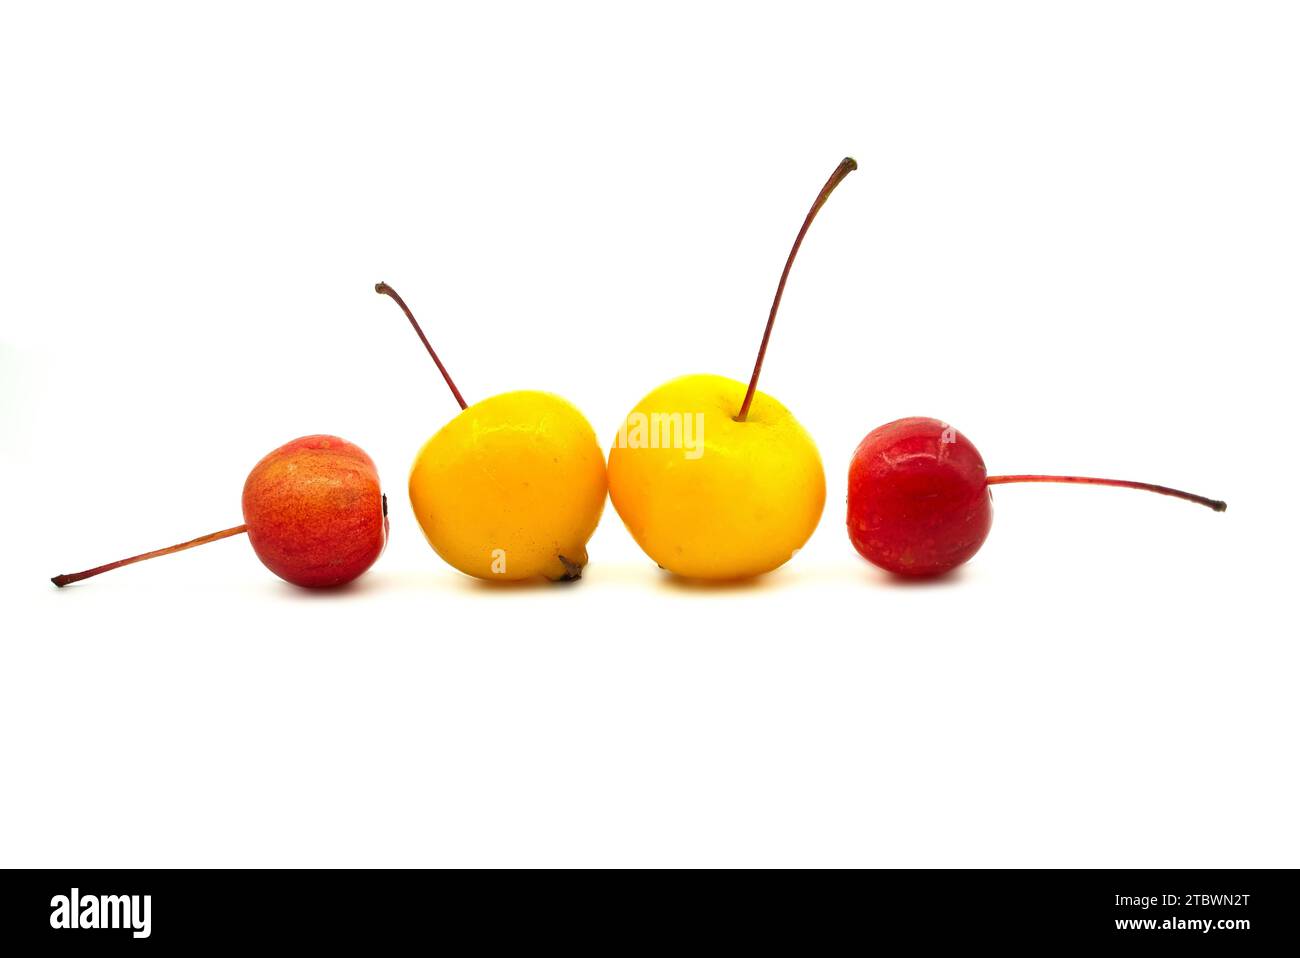 Wild apples or crab apples over a white background. Malus baccata Stock Photo